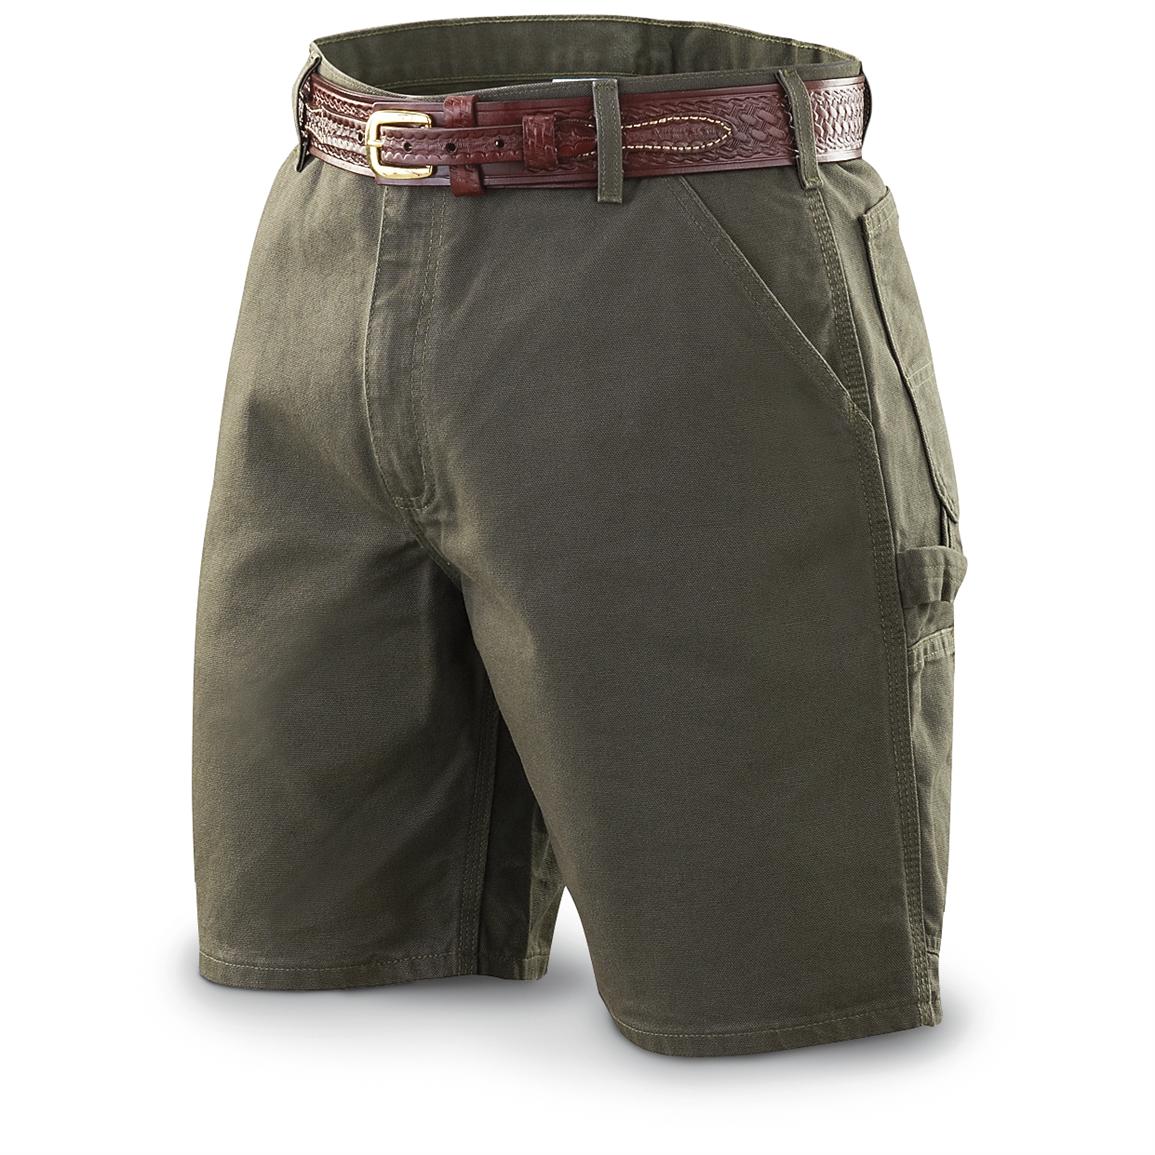 Carhartt Men's Washed Duck Work Shorts - 108520, Shorts at Sportsman's ...